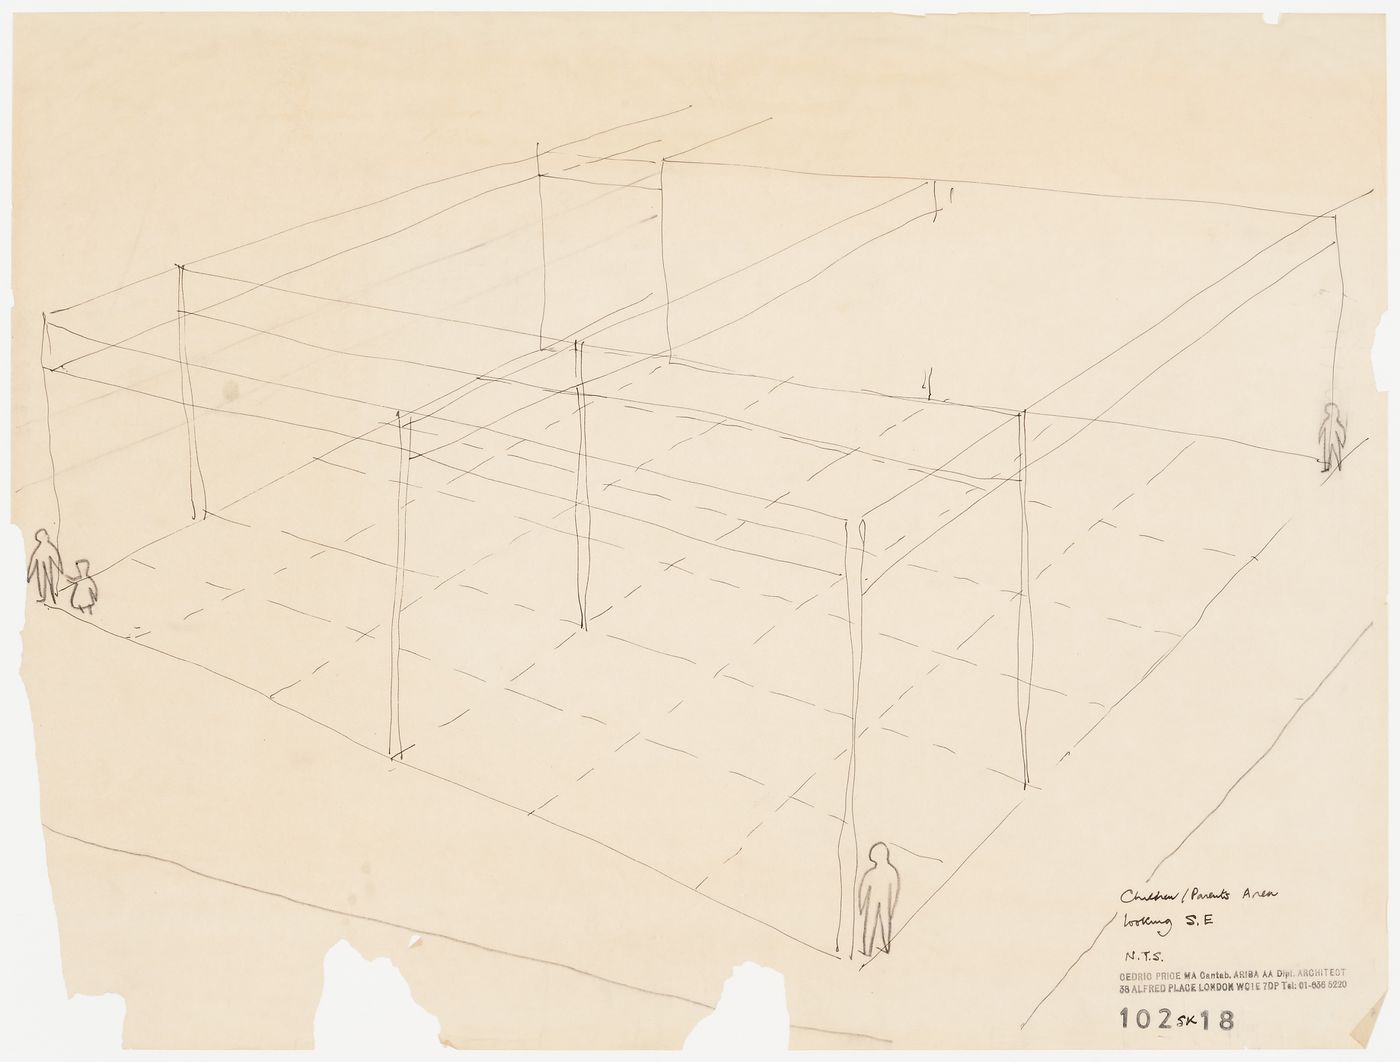 Inter-Action Centre, London, England: perspective sketch of area for parents and children, looking southeast